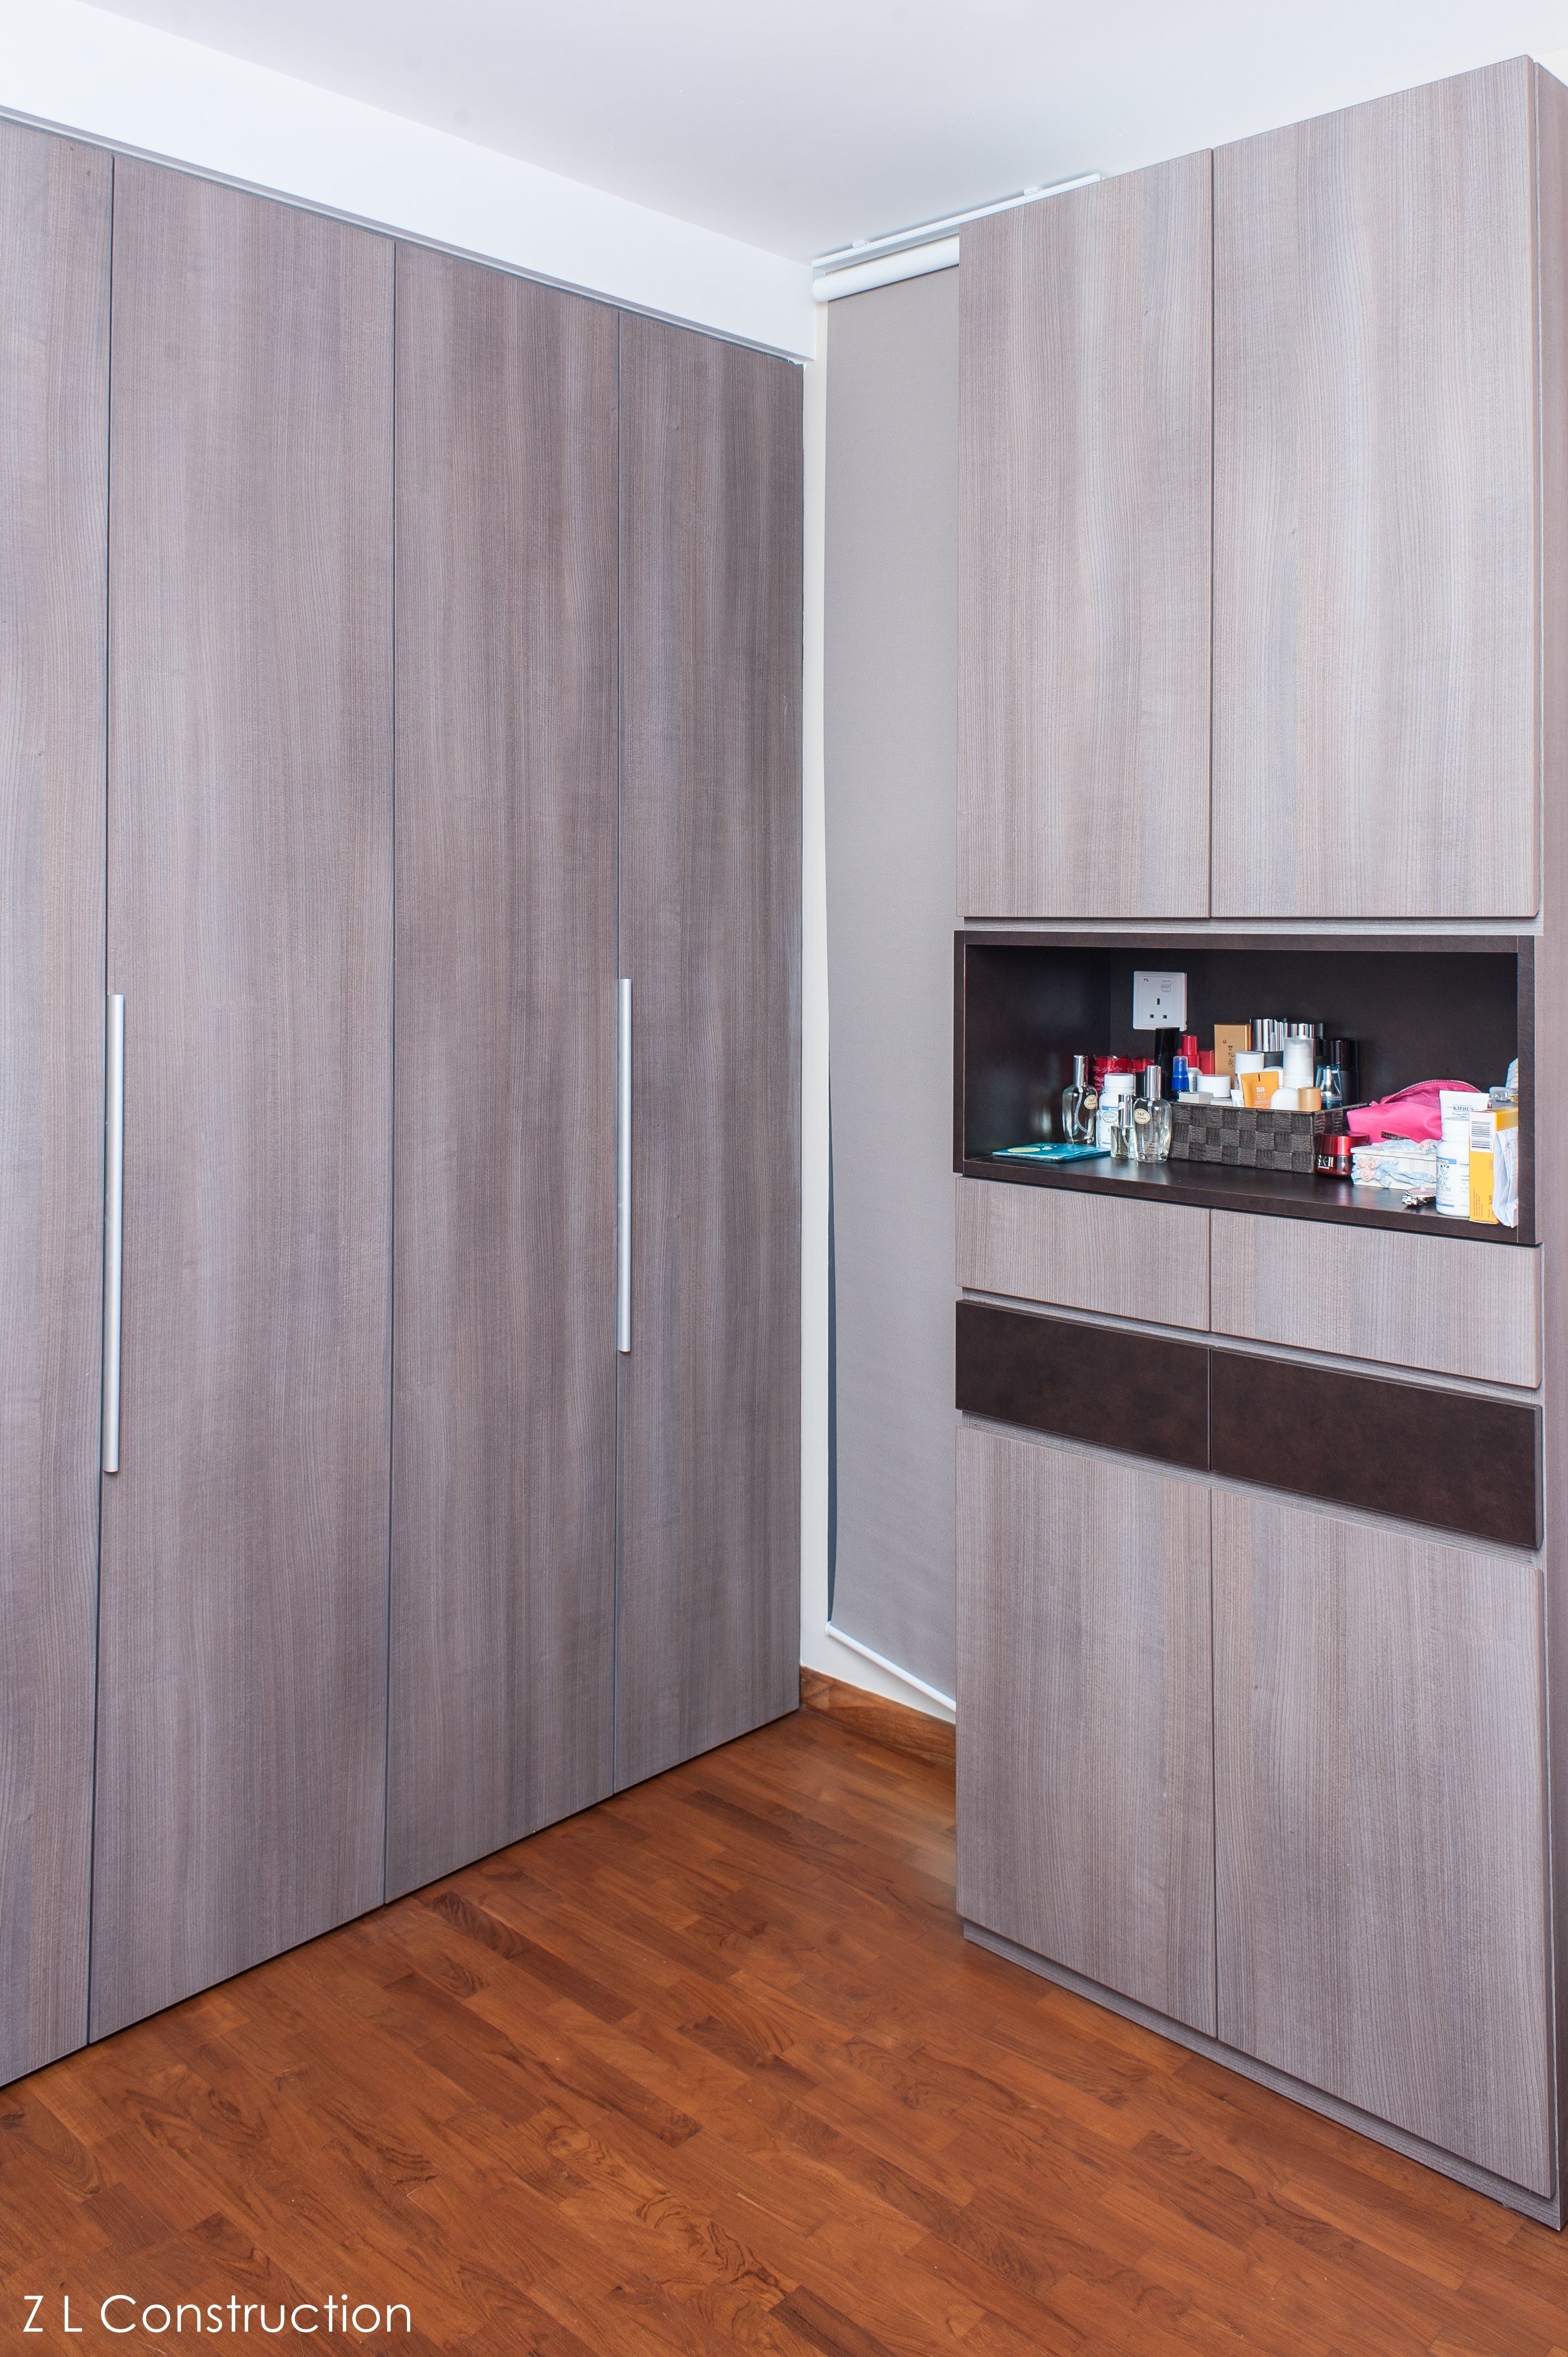 Z L Construction Singapore Wood Grained Laminated Wardrobe Within Dark Wardrobes (View 14 of 15)